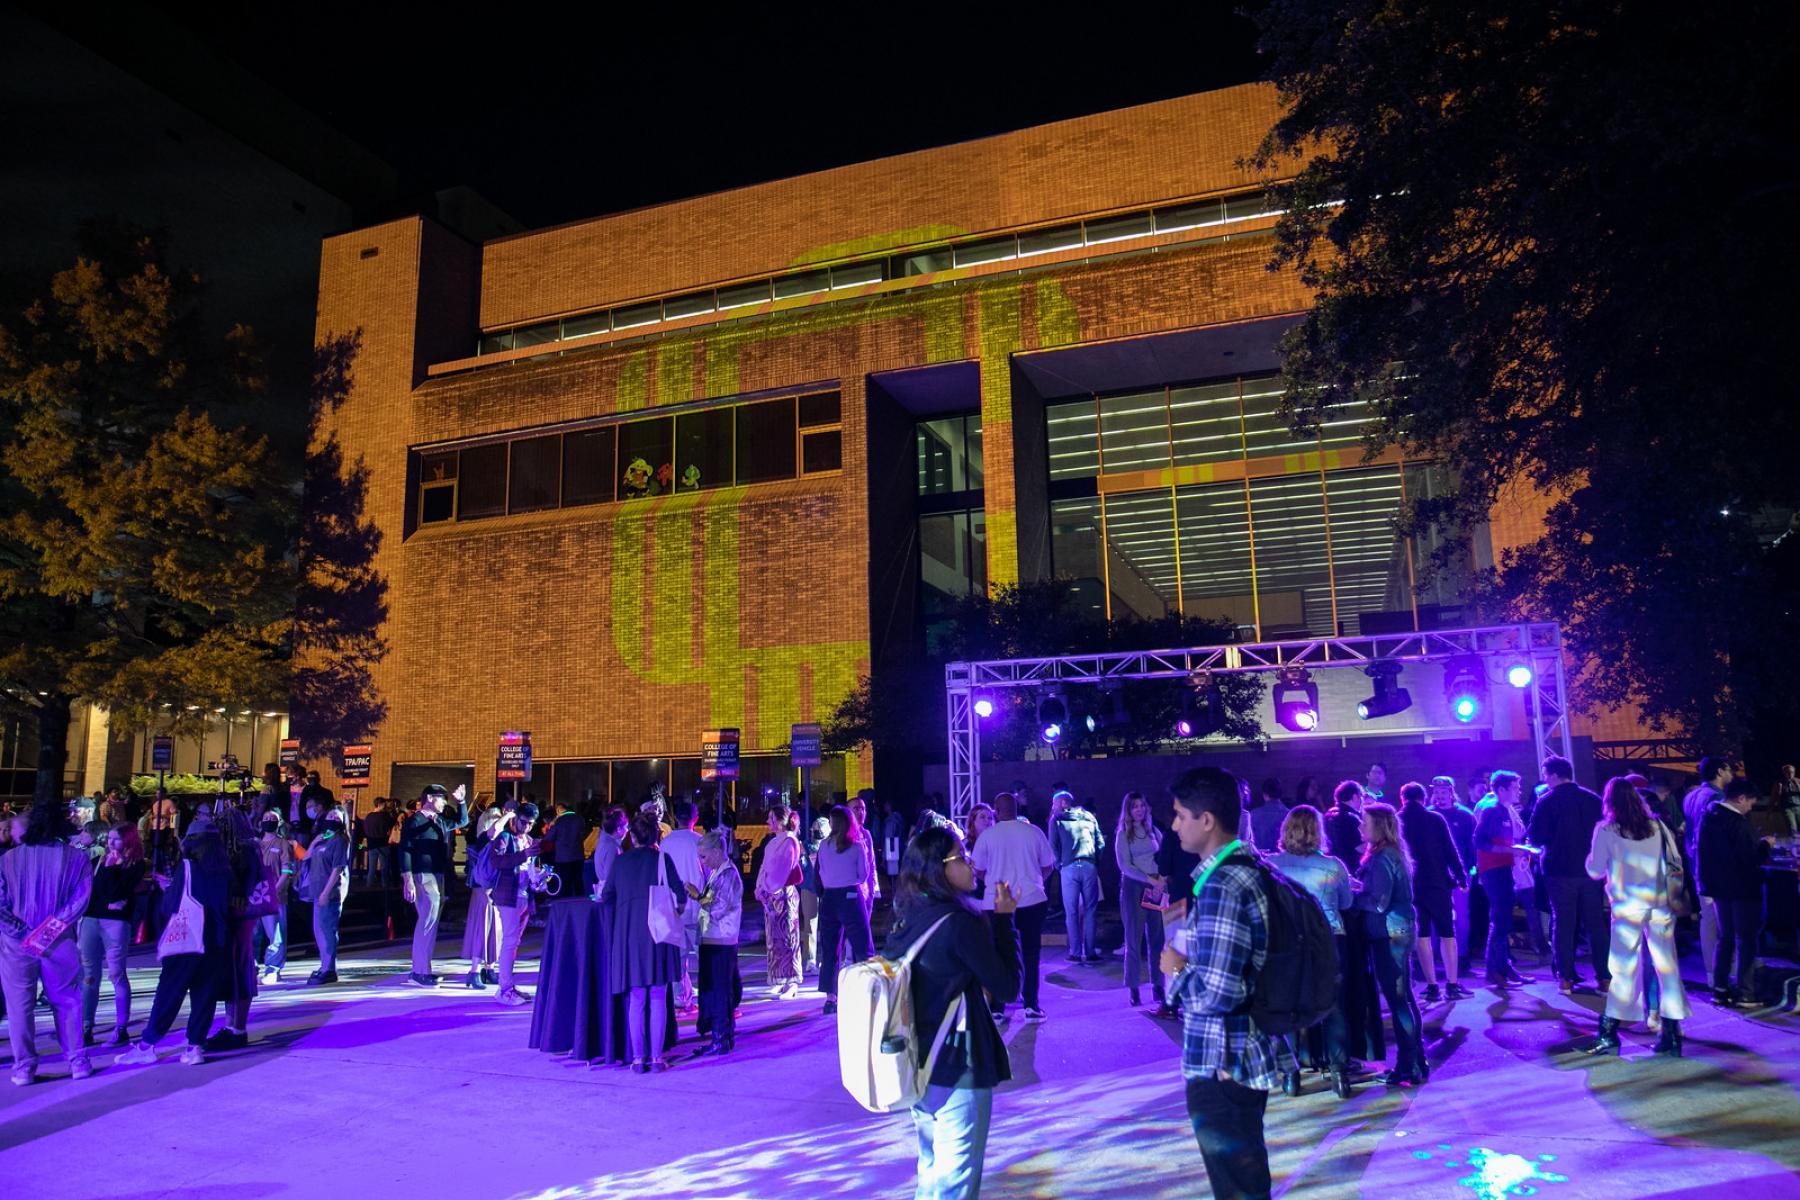 The loading dock next to the Performing Arts Center was converted into an interactive event space for Austin Design Week in November.